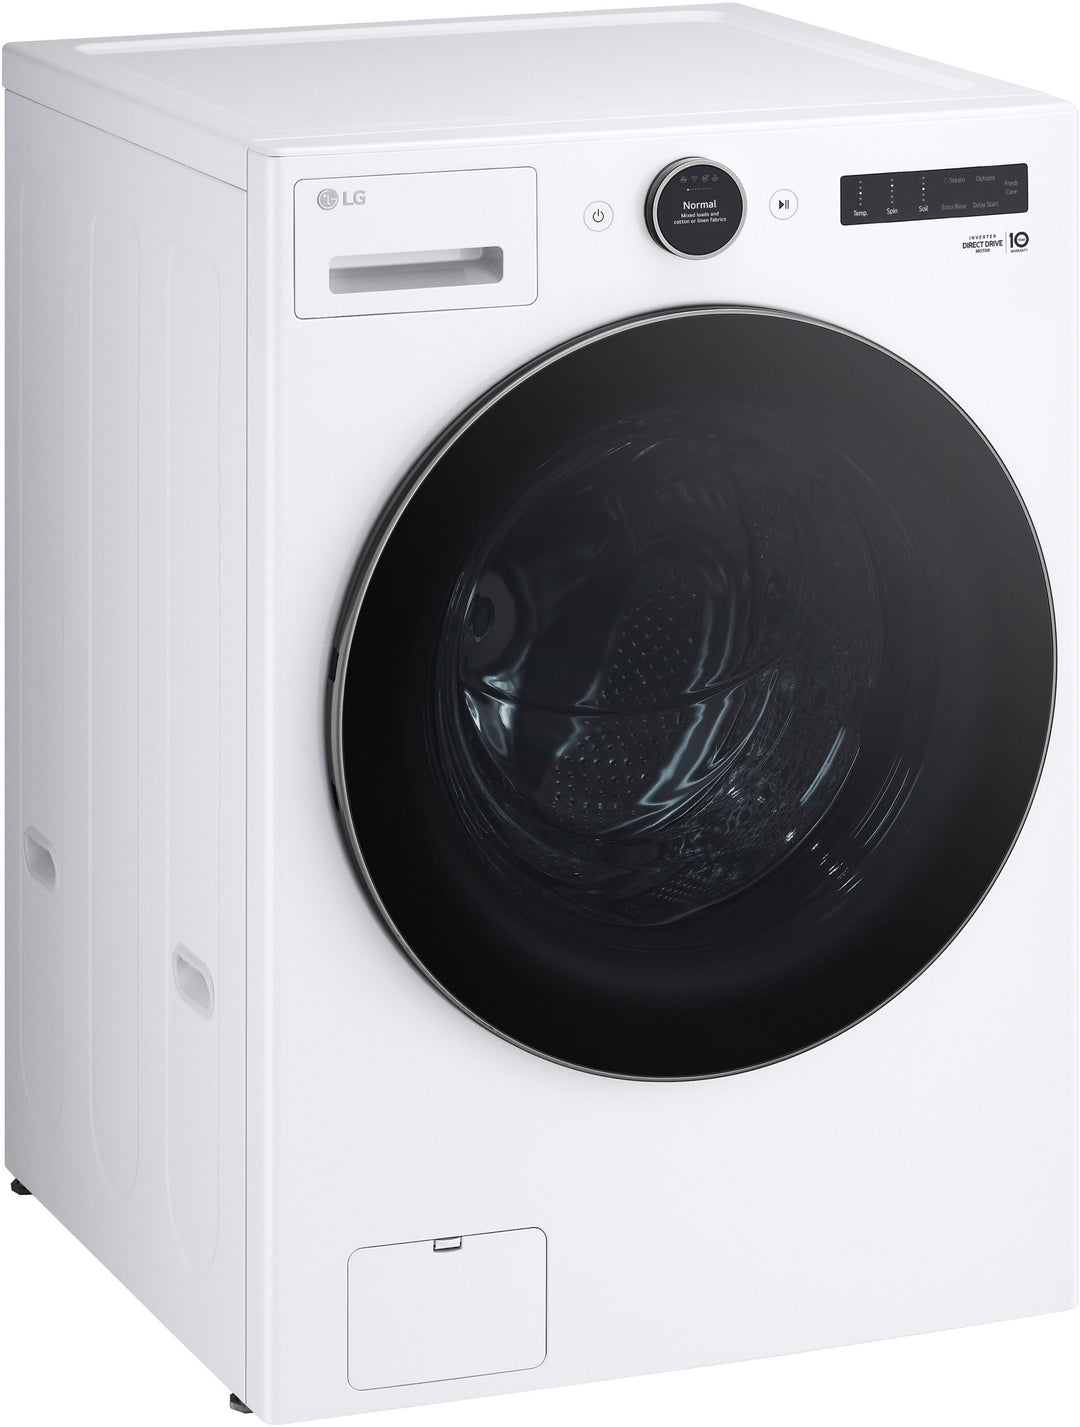 LG - 4.5 Cu. Ft. High-Efficiency Smart Front Load Washer with Steam and TurboWash 360 - White_8